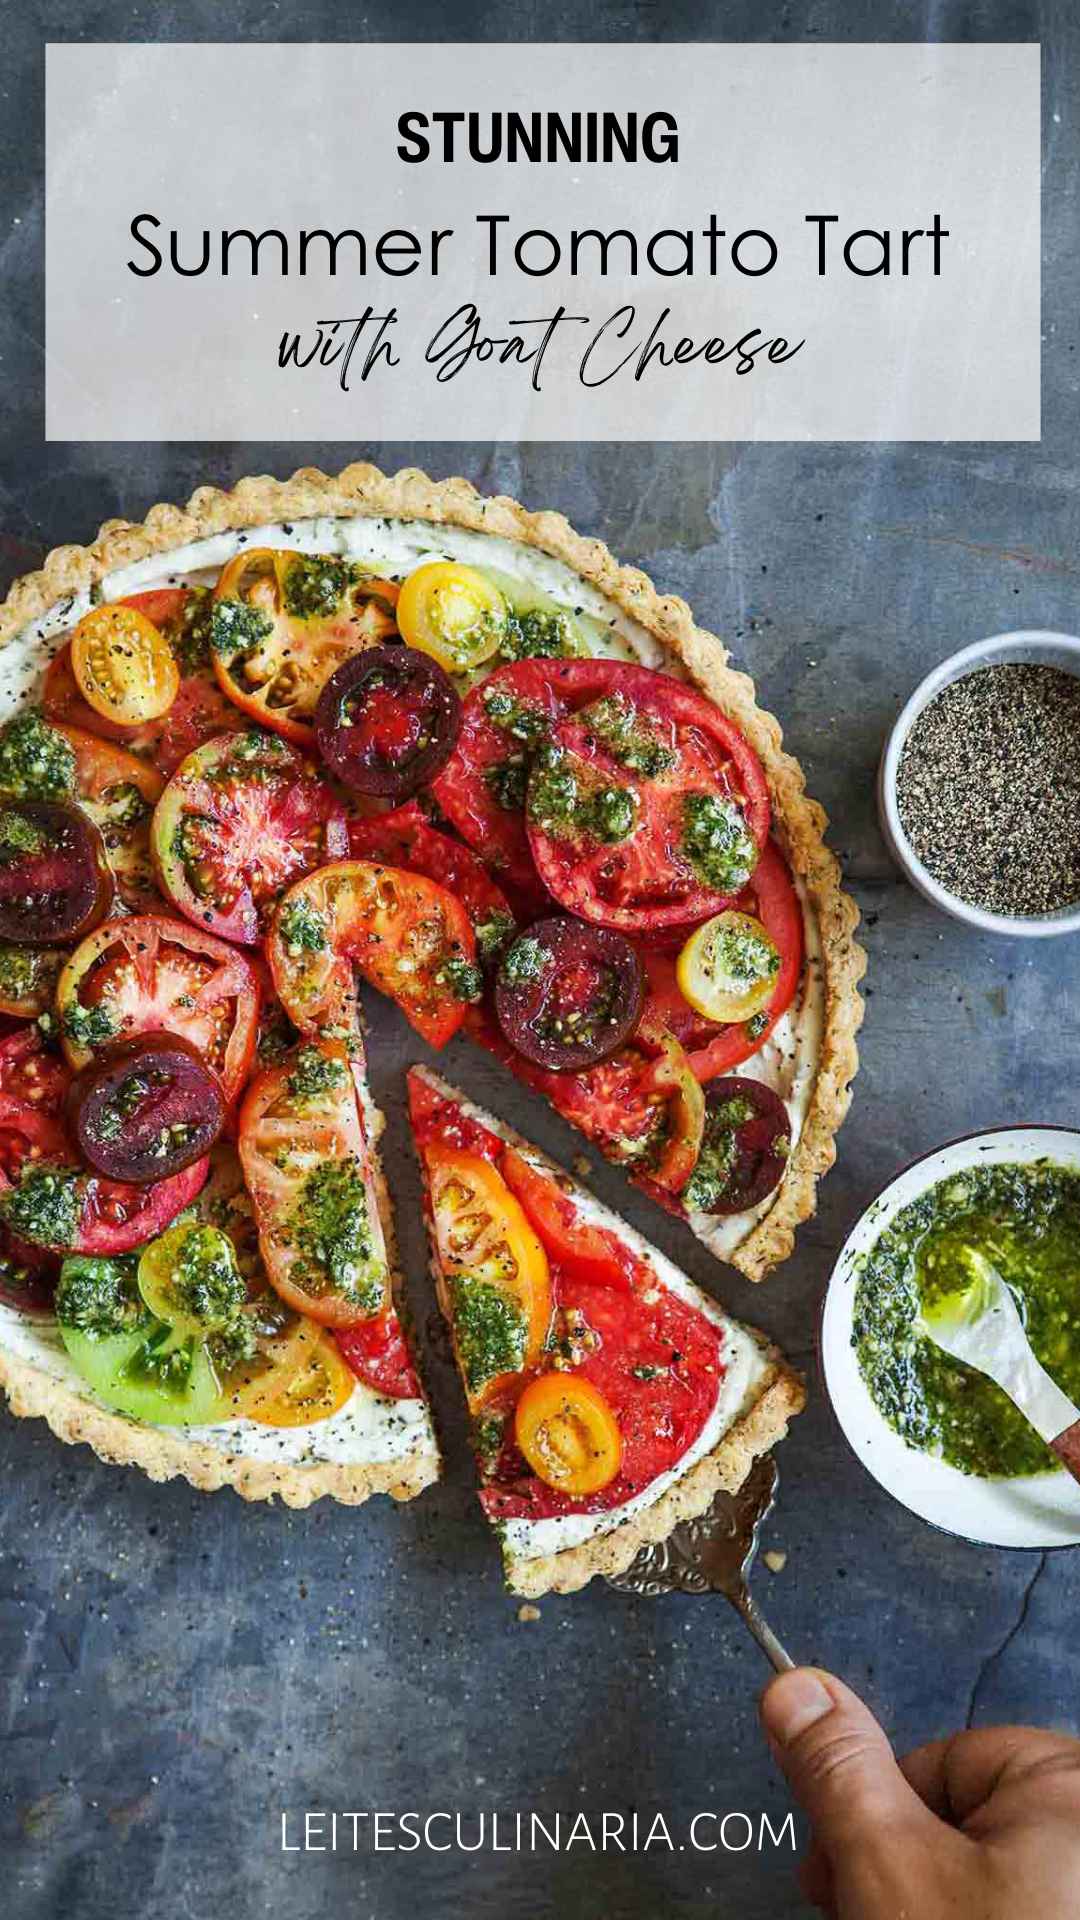 A whole tomato tart with one slice being removed from it and a bowl of pesto sauce on the side.